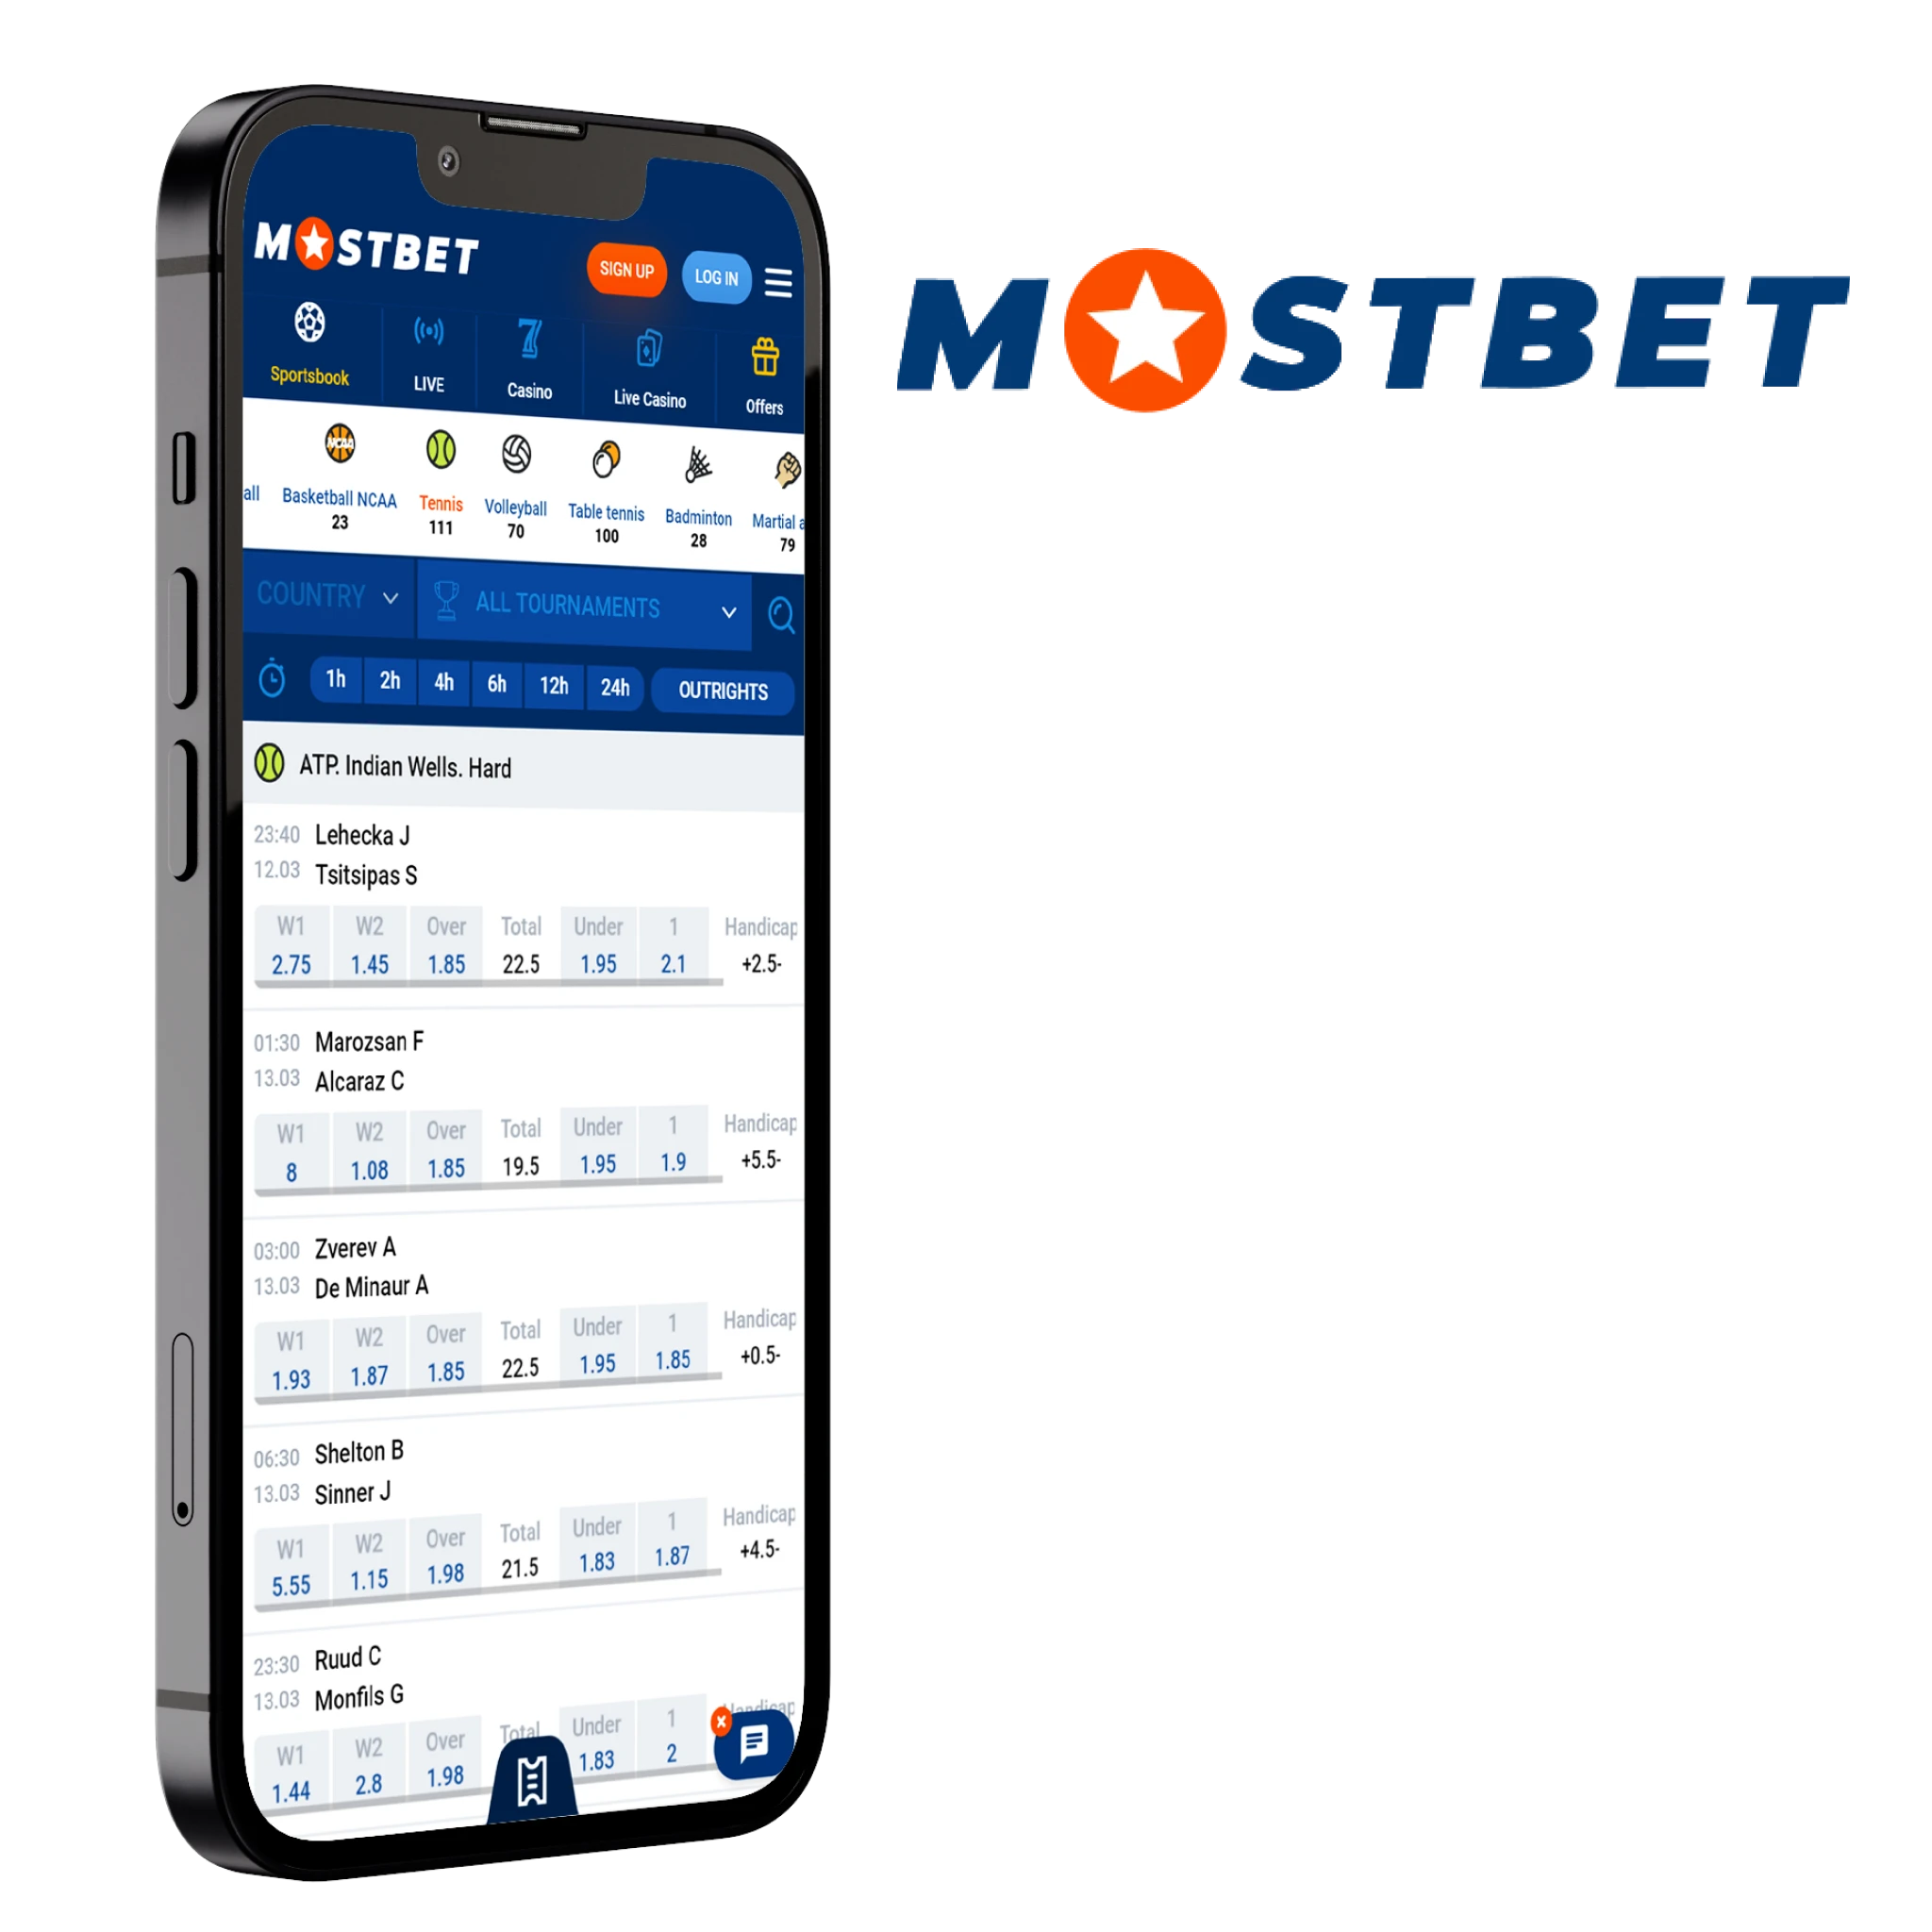 The Mostbet app has many advantages for online tennis betting.